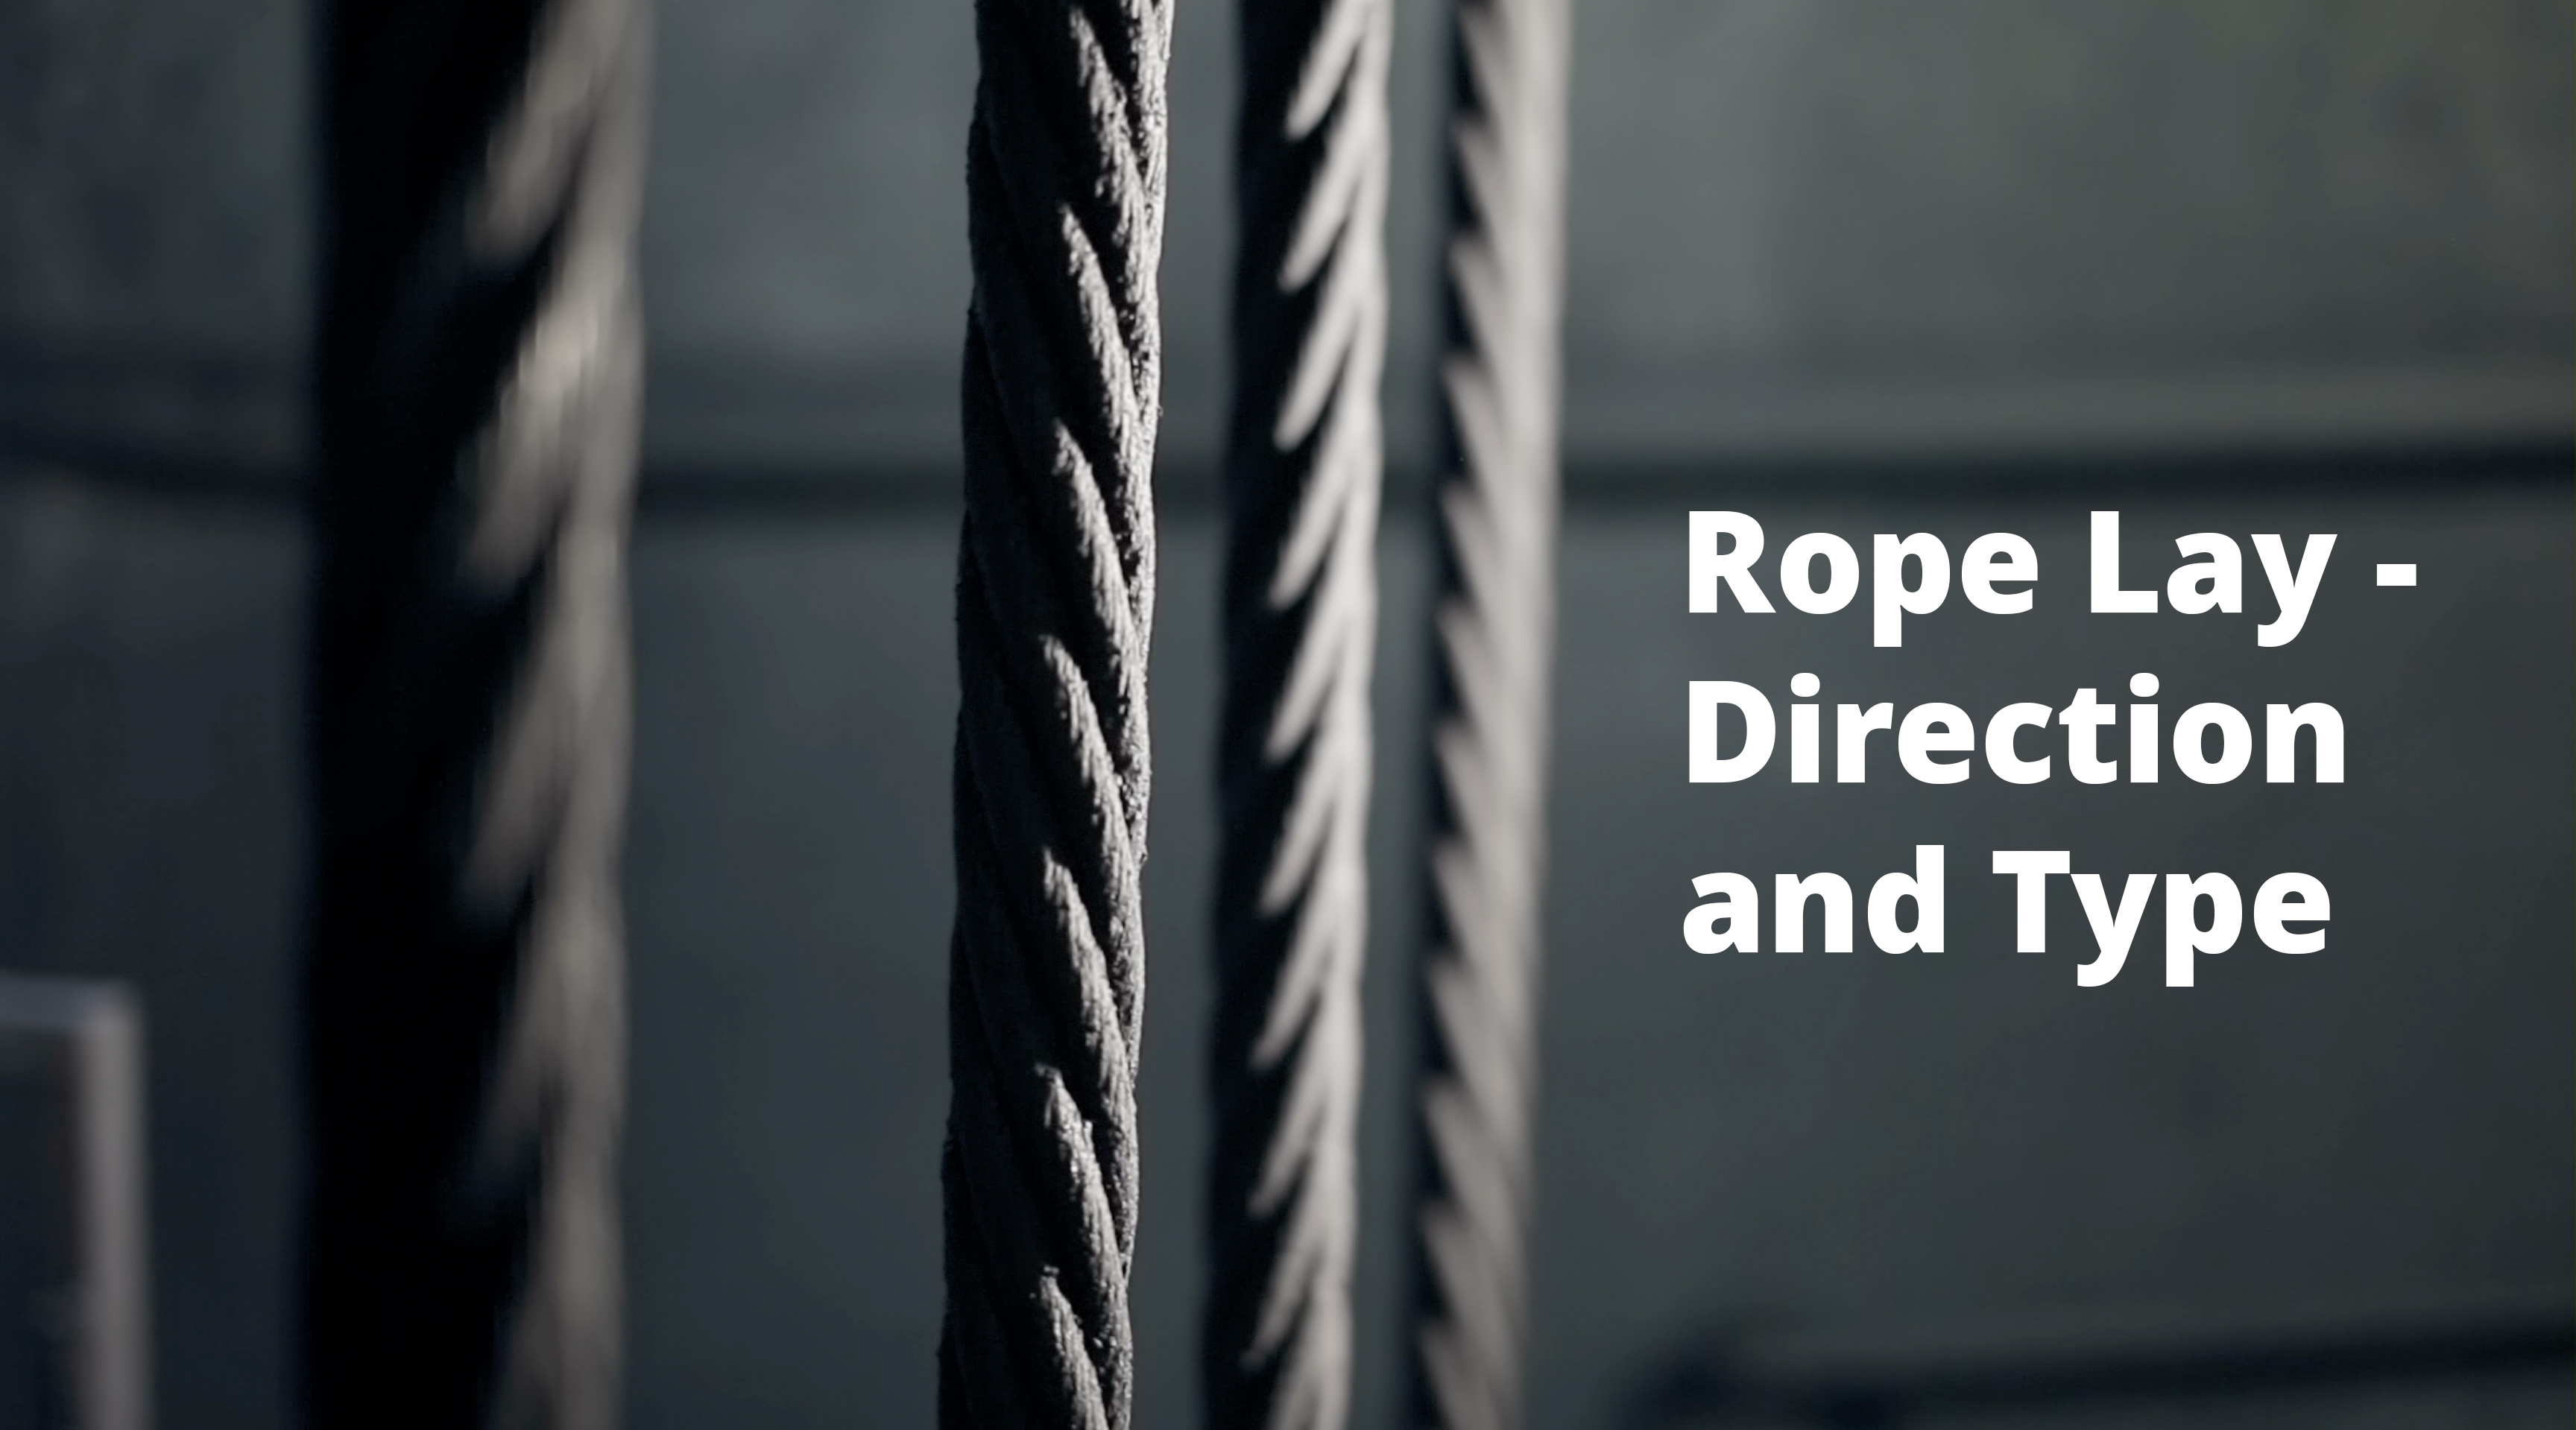 Thumbnail image for the podcast "Rope lay  and direction explained" featuring an image of steel wire rope & text containing the podcast title.